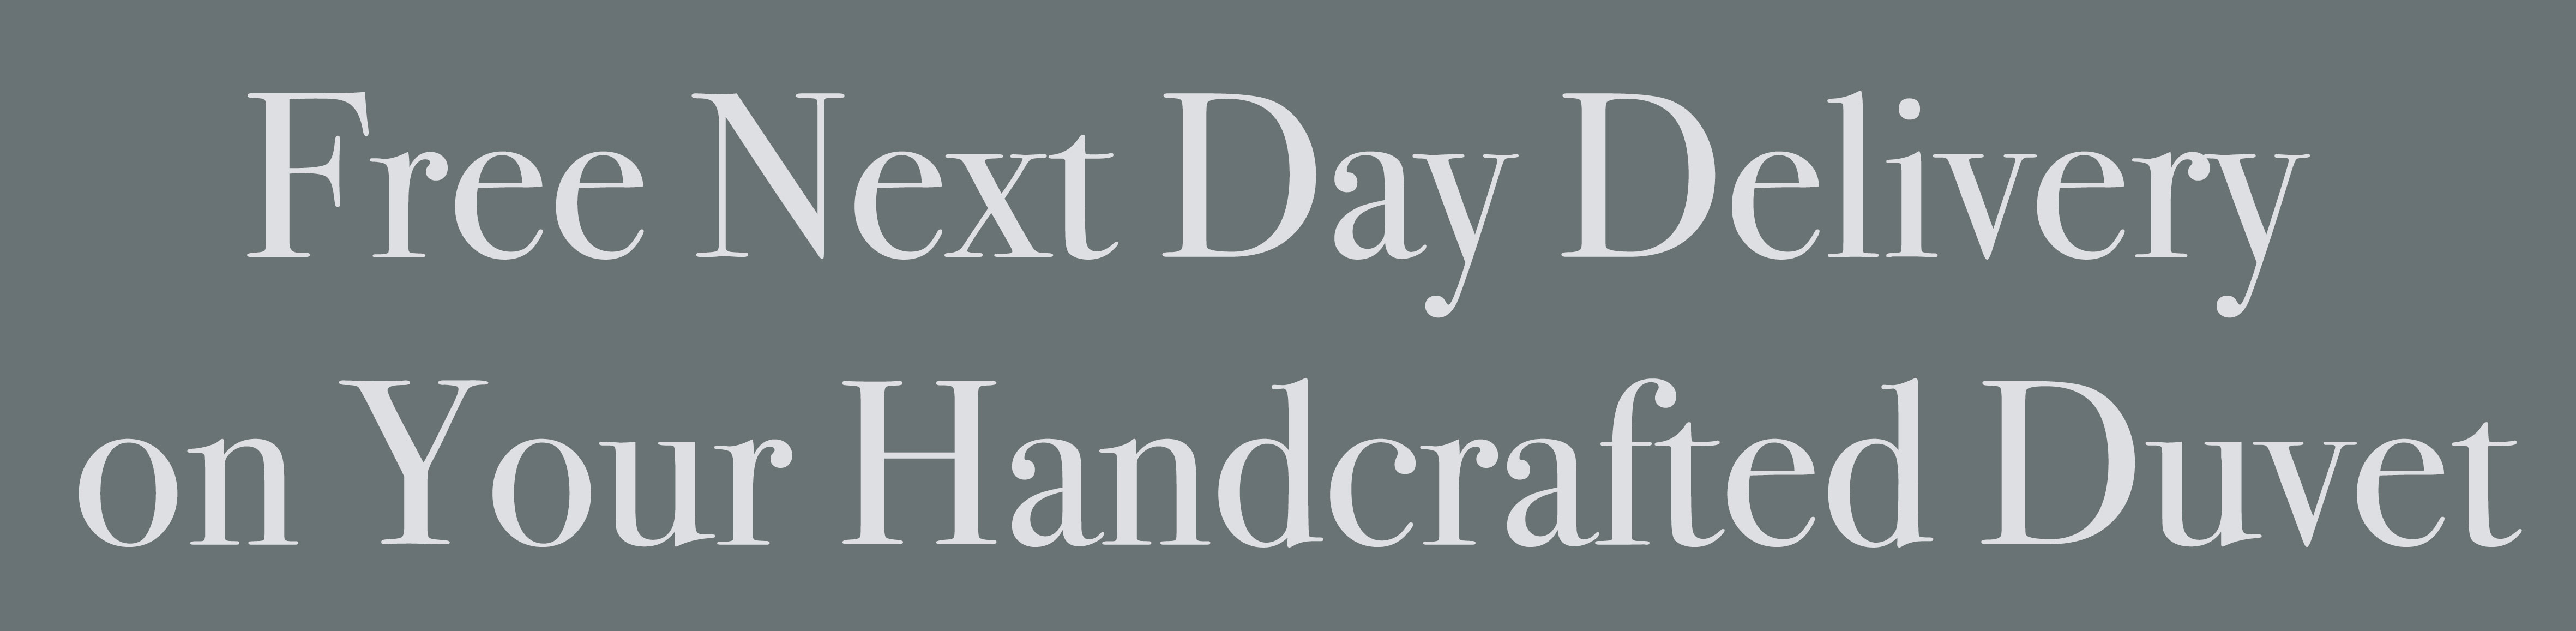 Free next day delivery on your handmade duvet text box banner